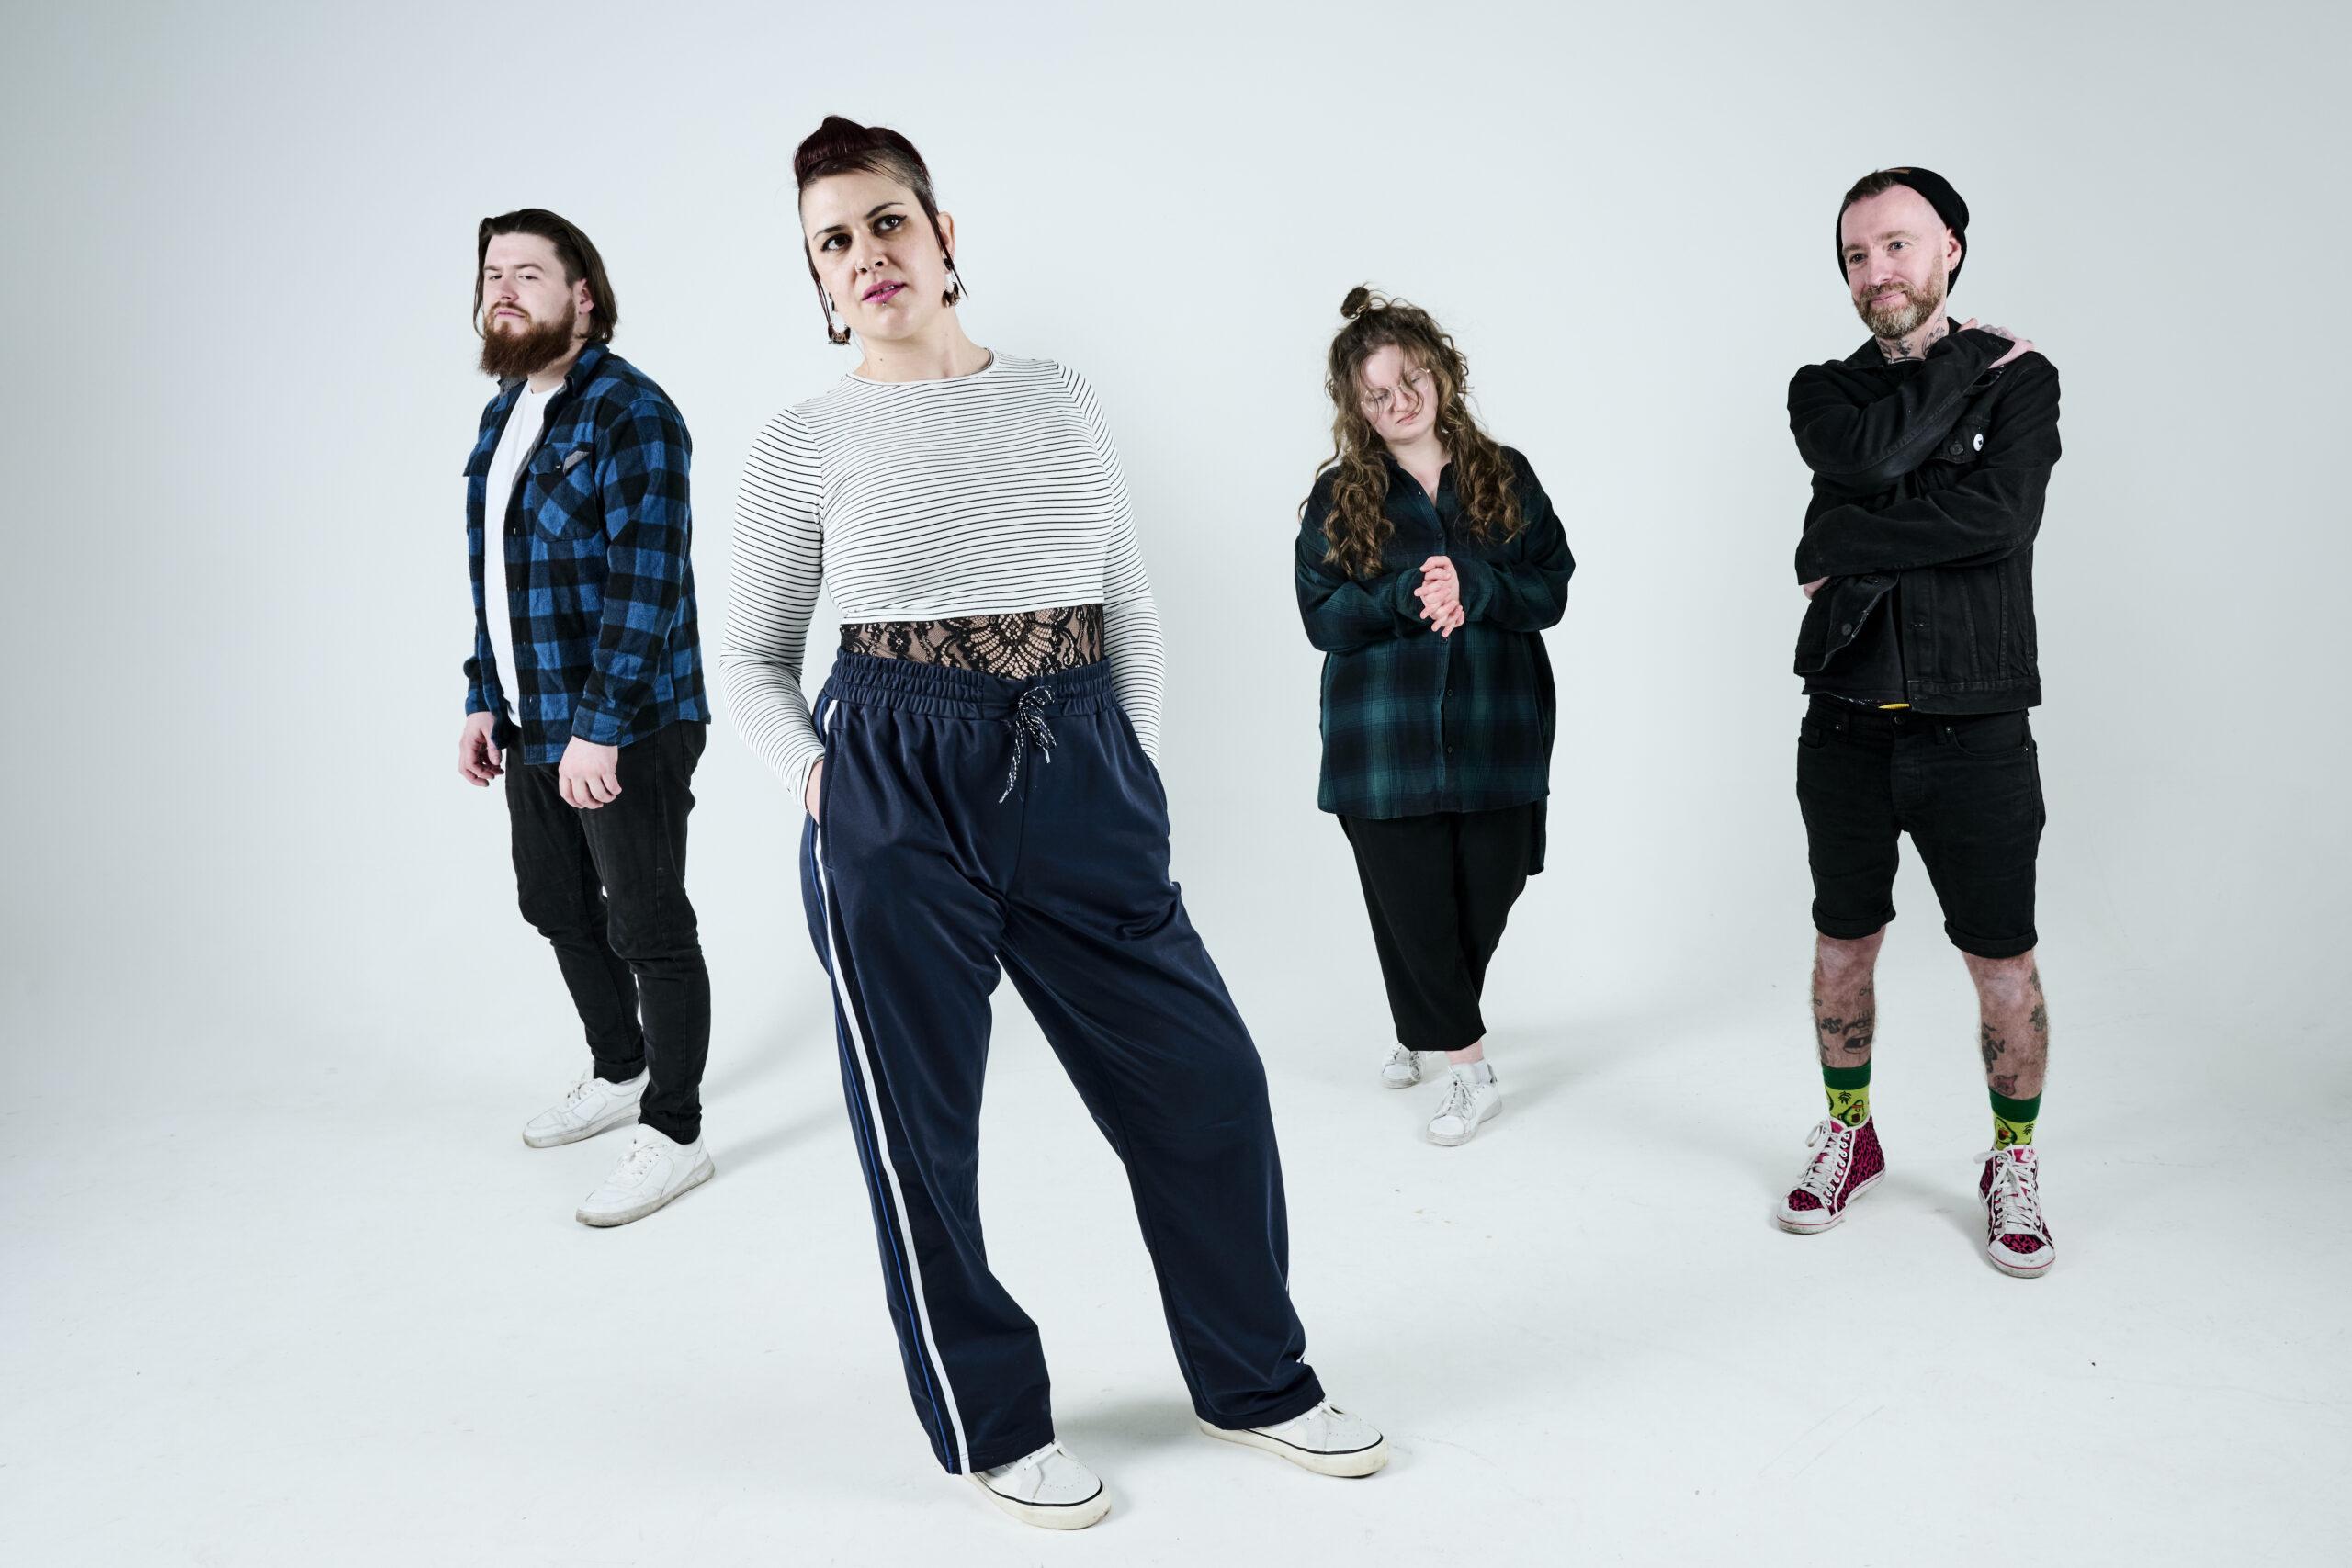 Mille Manders and The Shutup Release Brand New Double A-Side Single